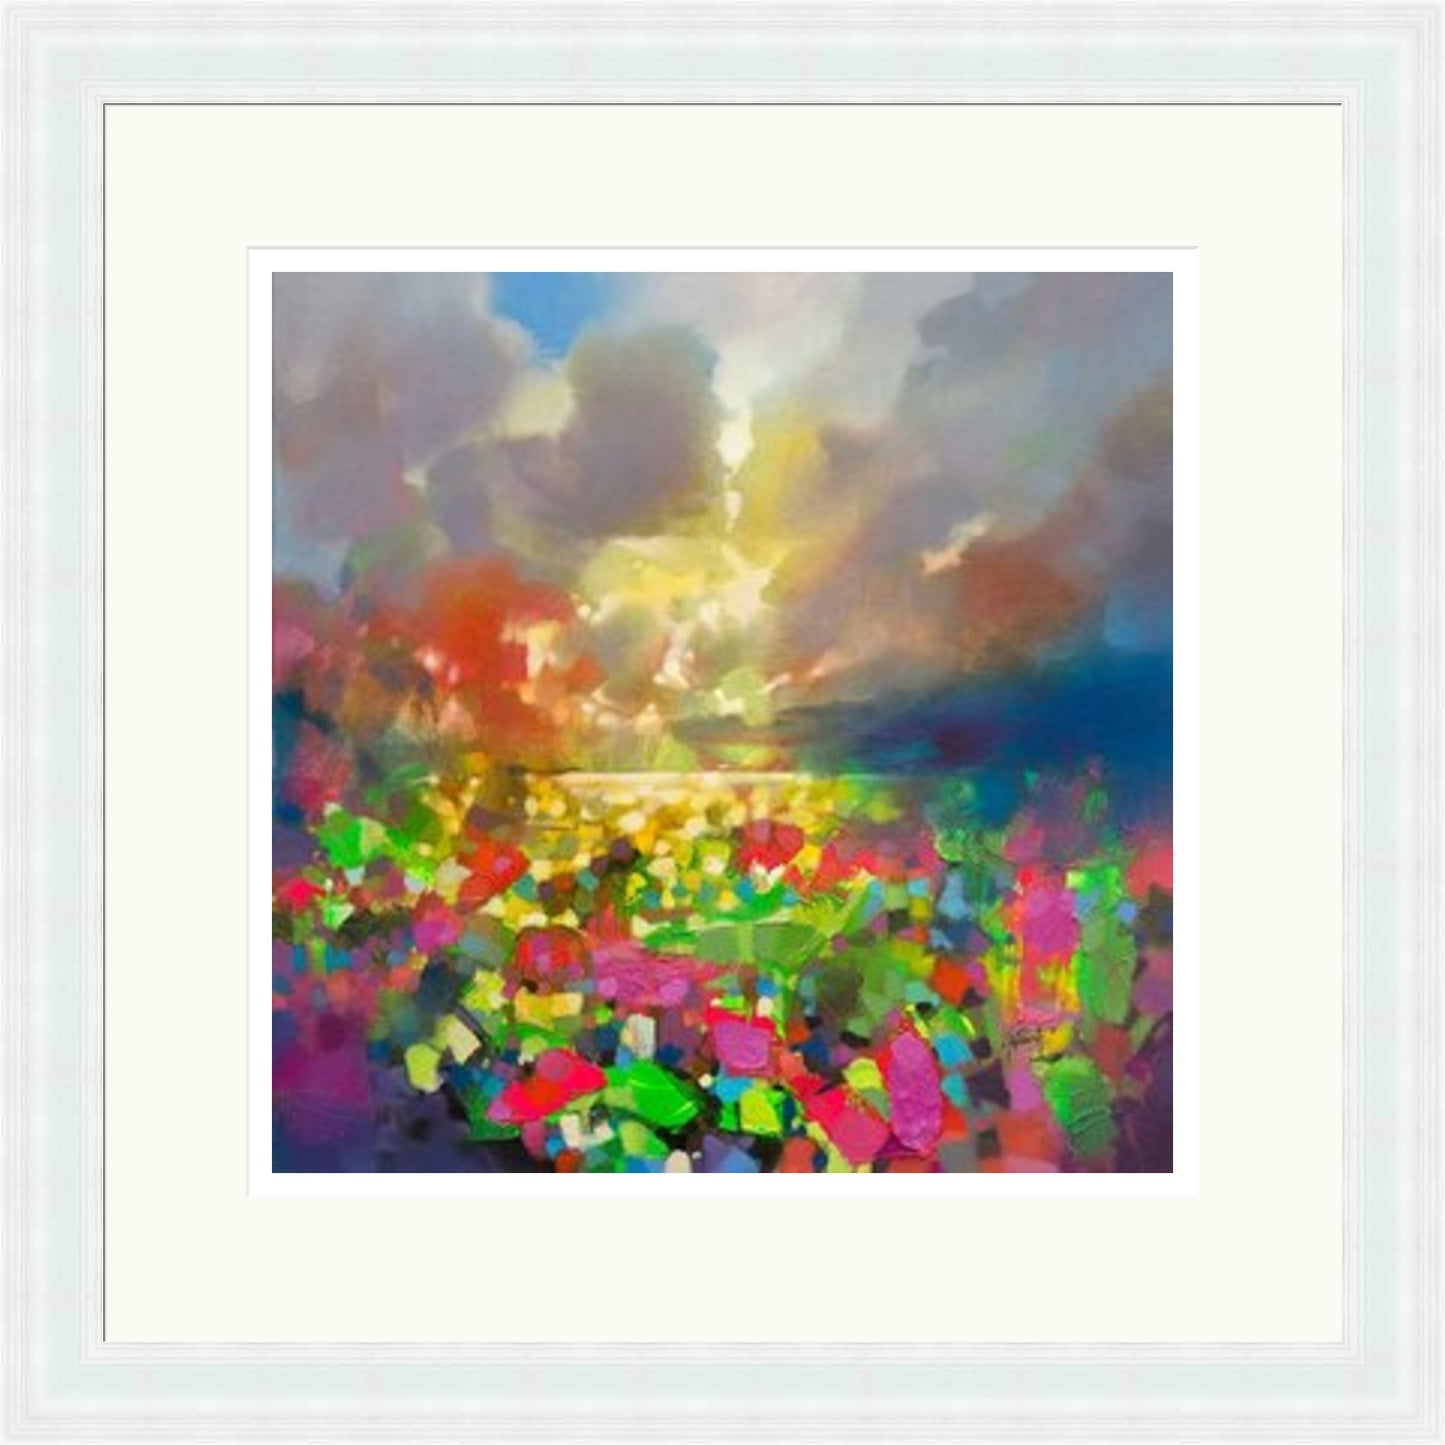 Convection (Limited Edition) by Scott Naismith